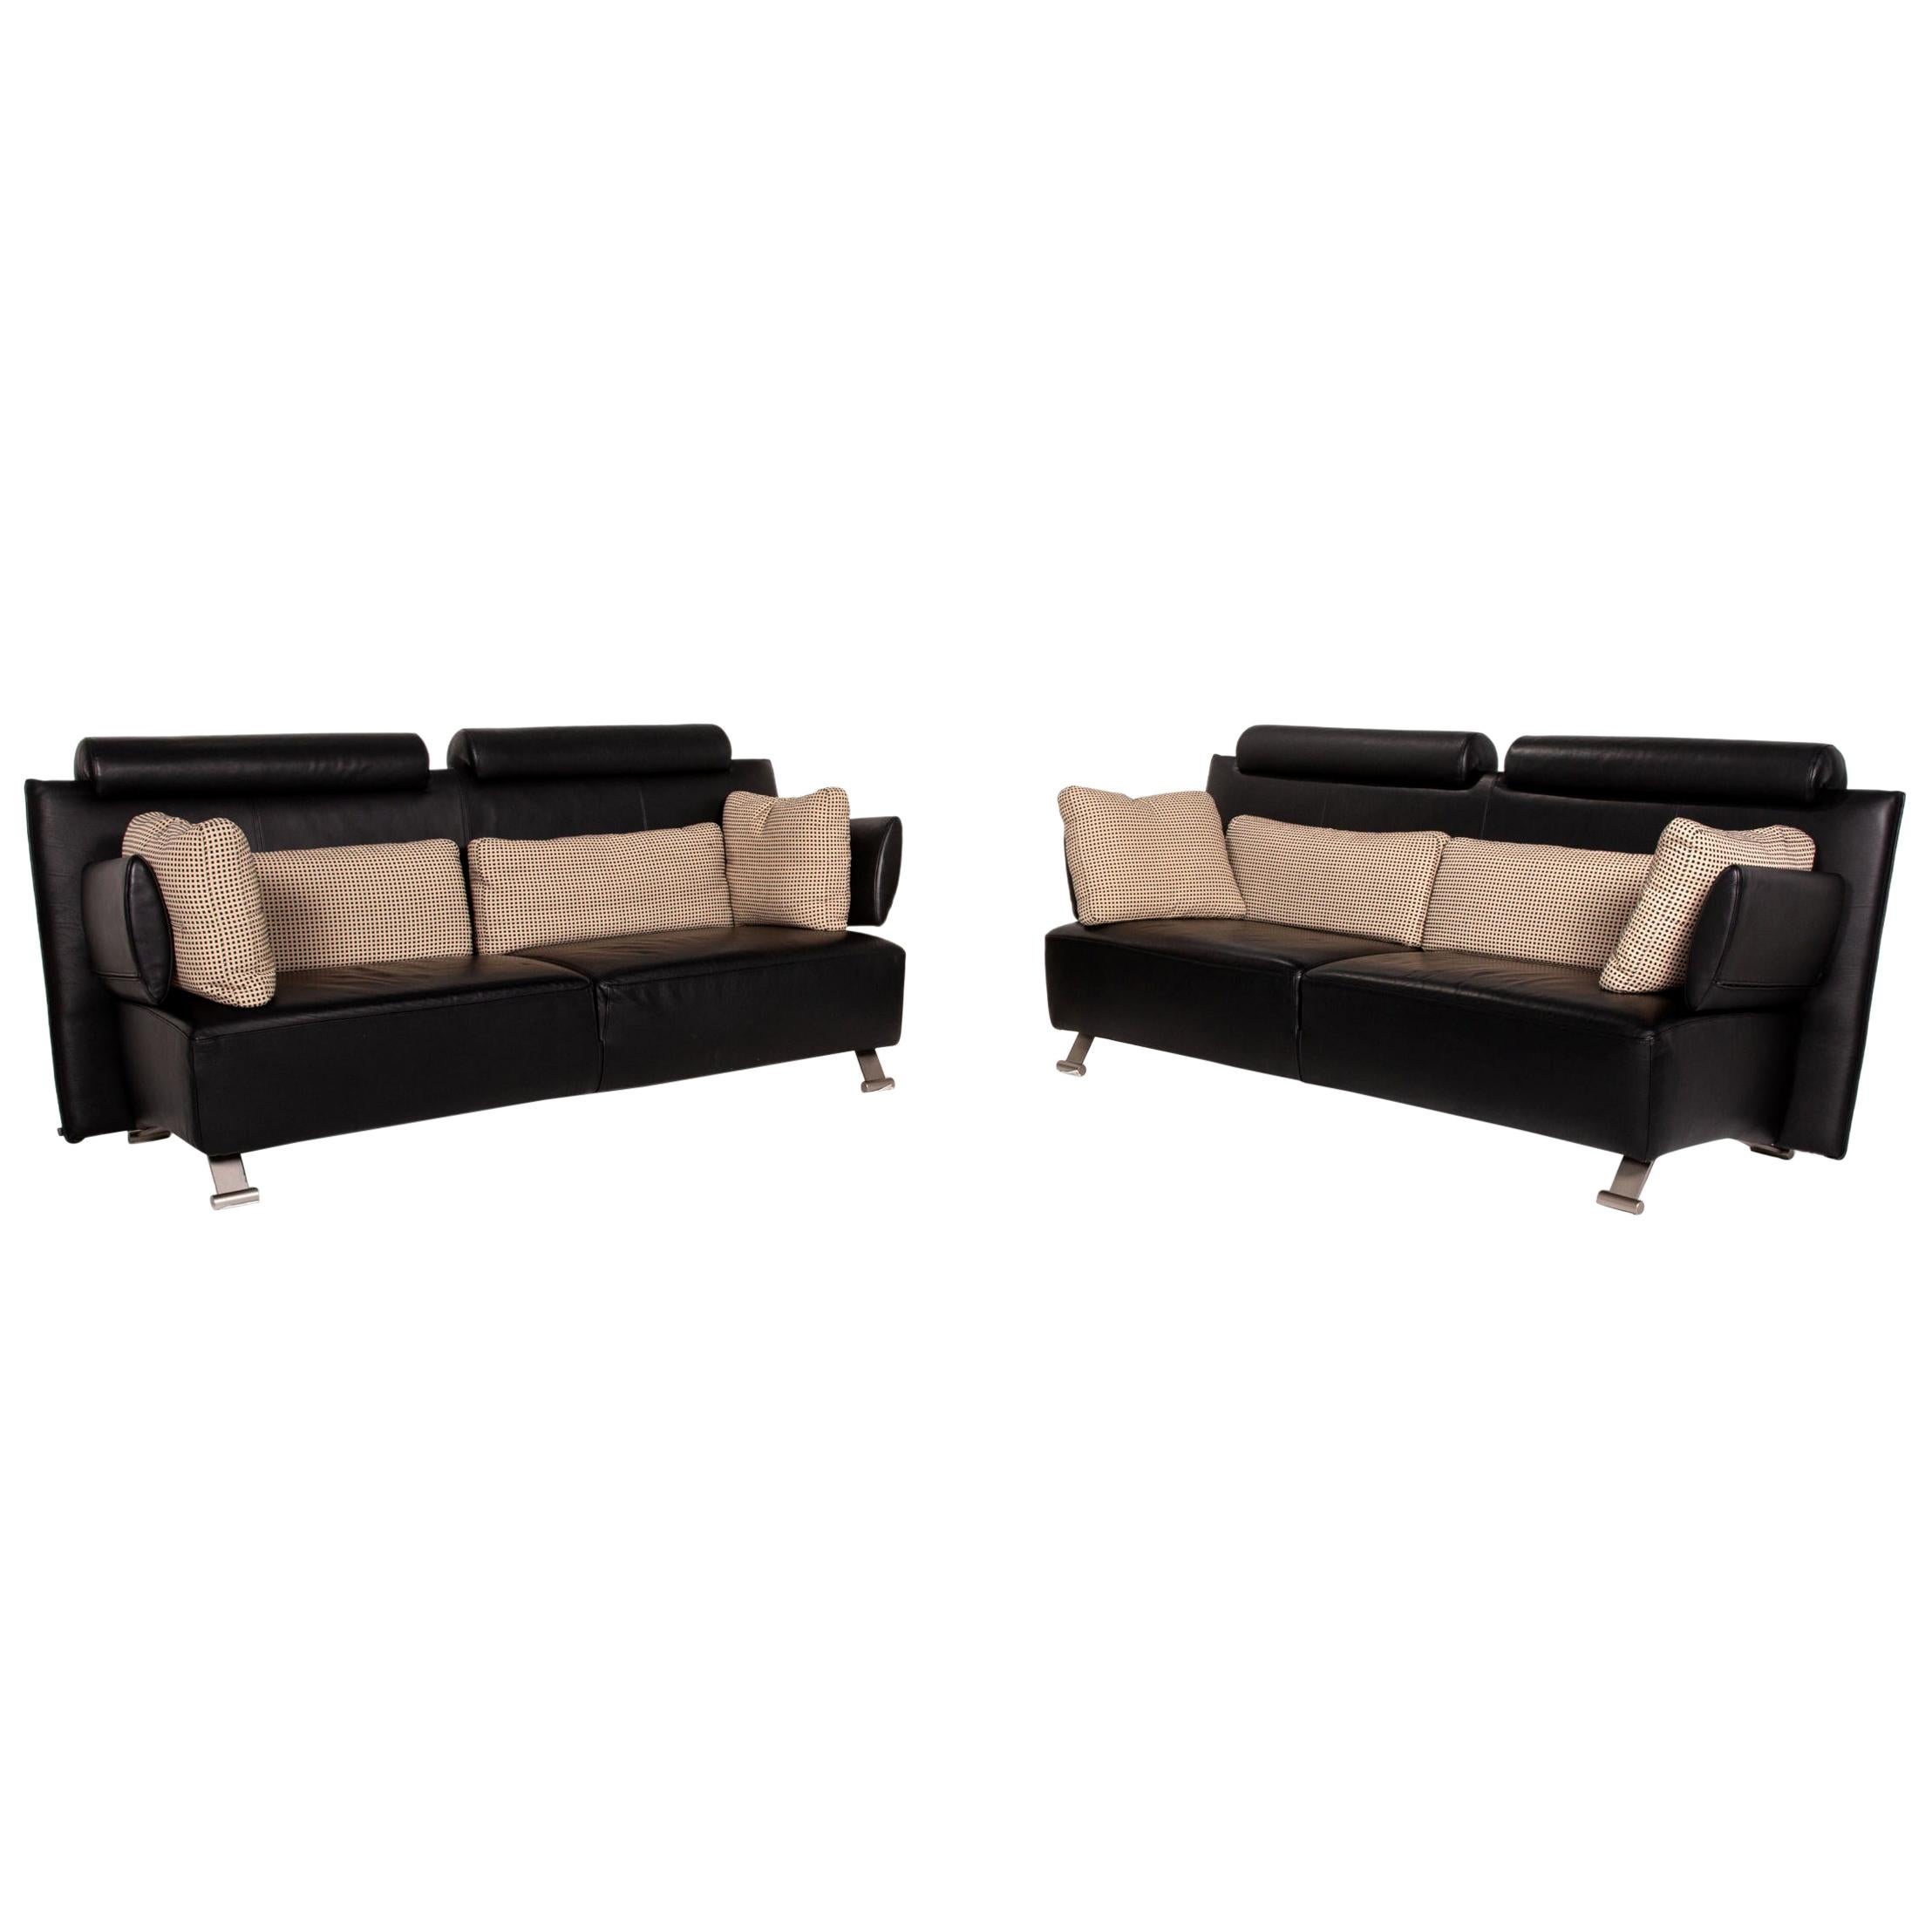 COR Sera Leather Sofa Set Black 2x Two-Seater Function For Sale